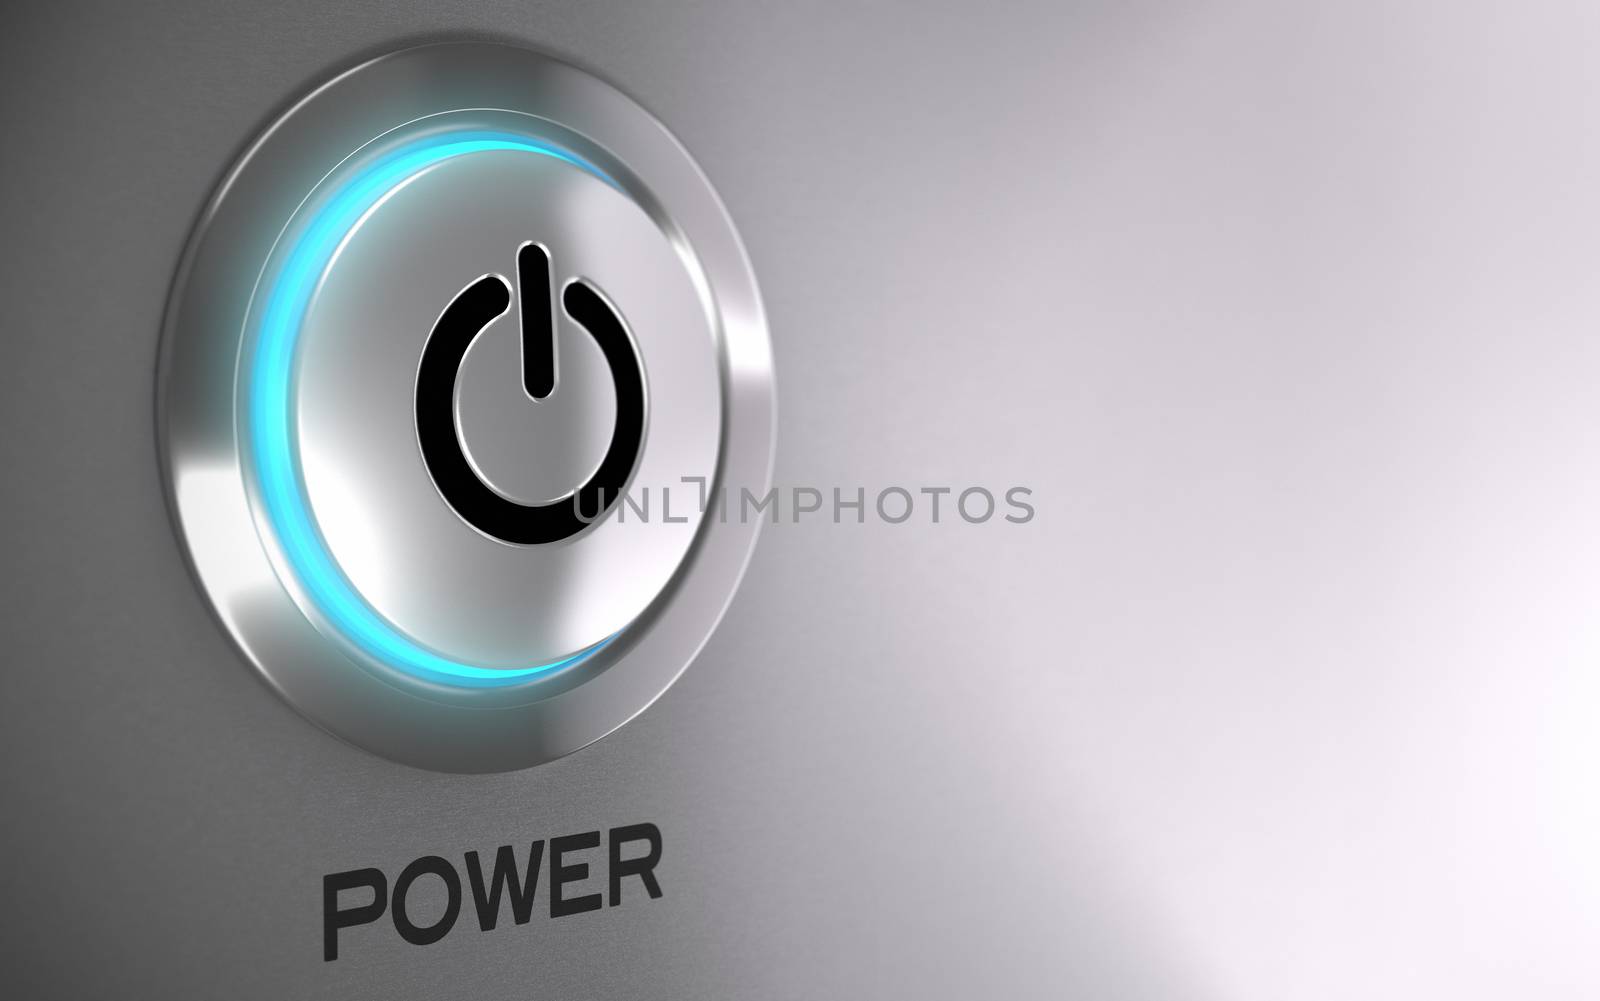 Push button with blue light and depth of field effect - 3D render concept image suitable for power energy button with copy space on the right side 